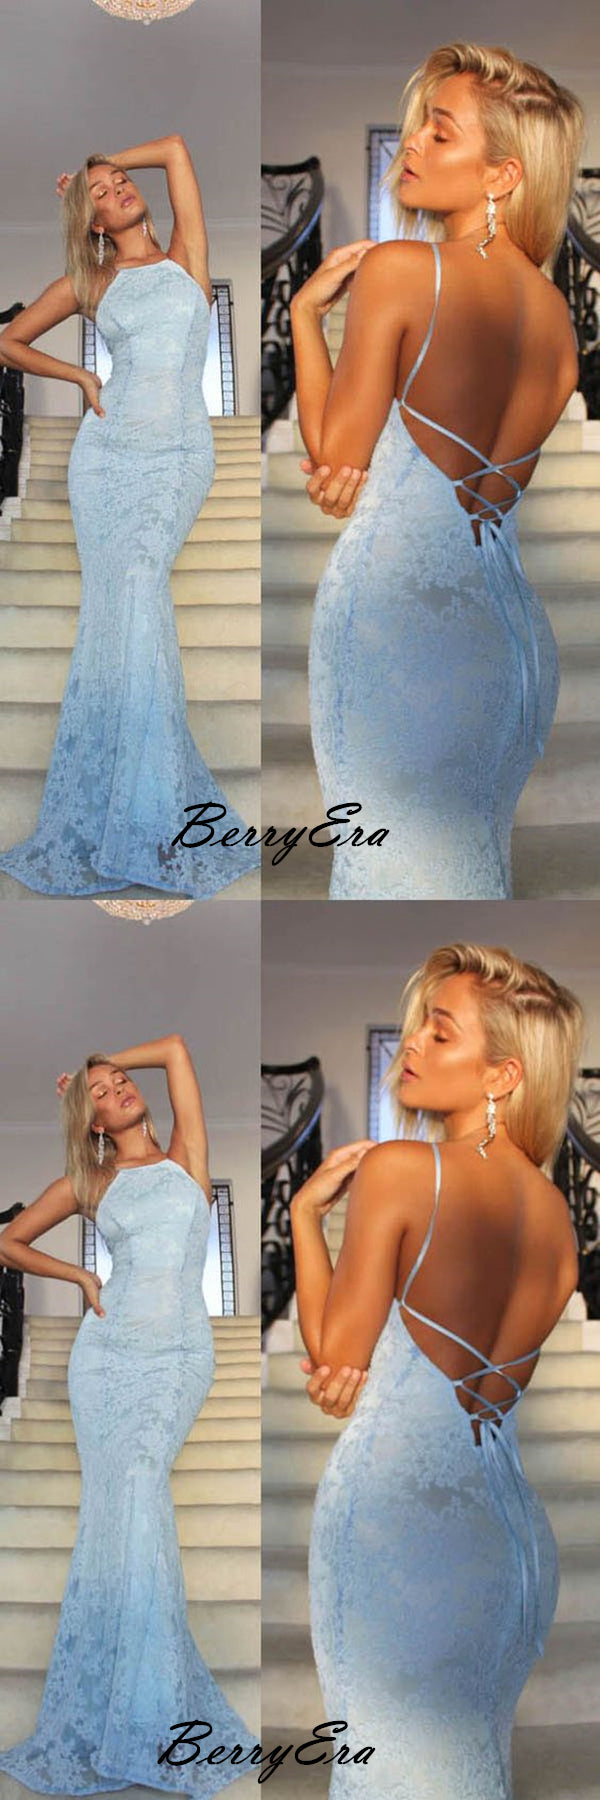 Newest Light Blue Lace Prom Dresses, Open Back Sexy Mermaid Prom Dresses